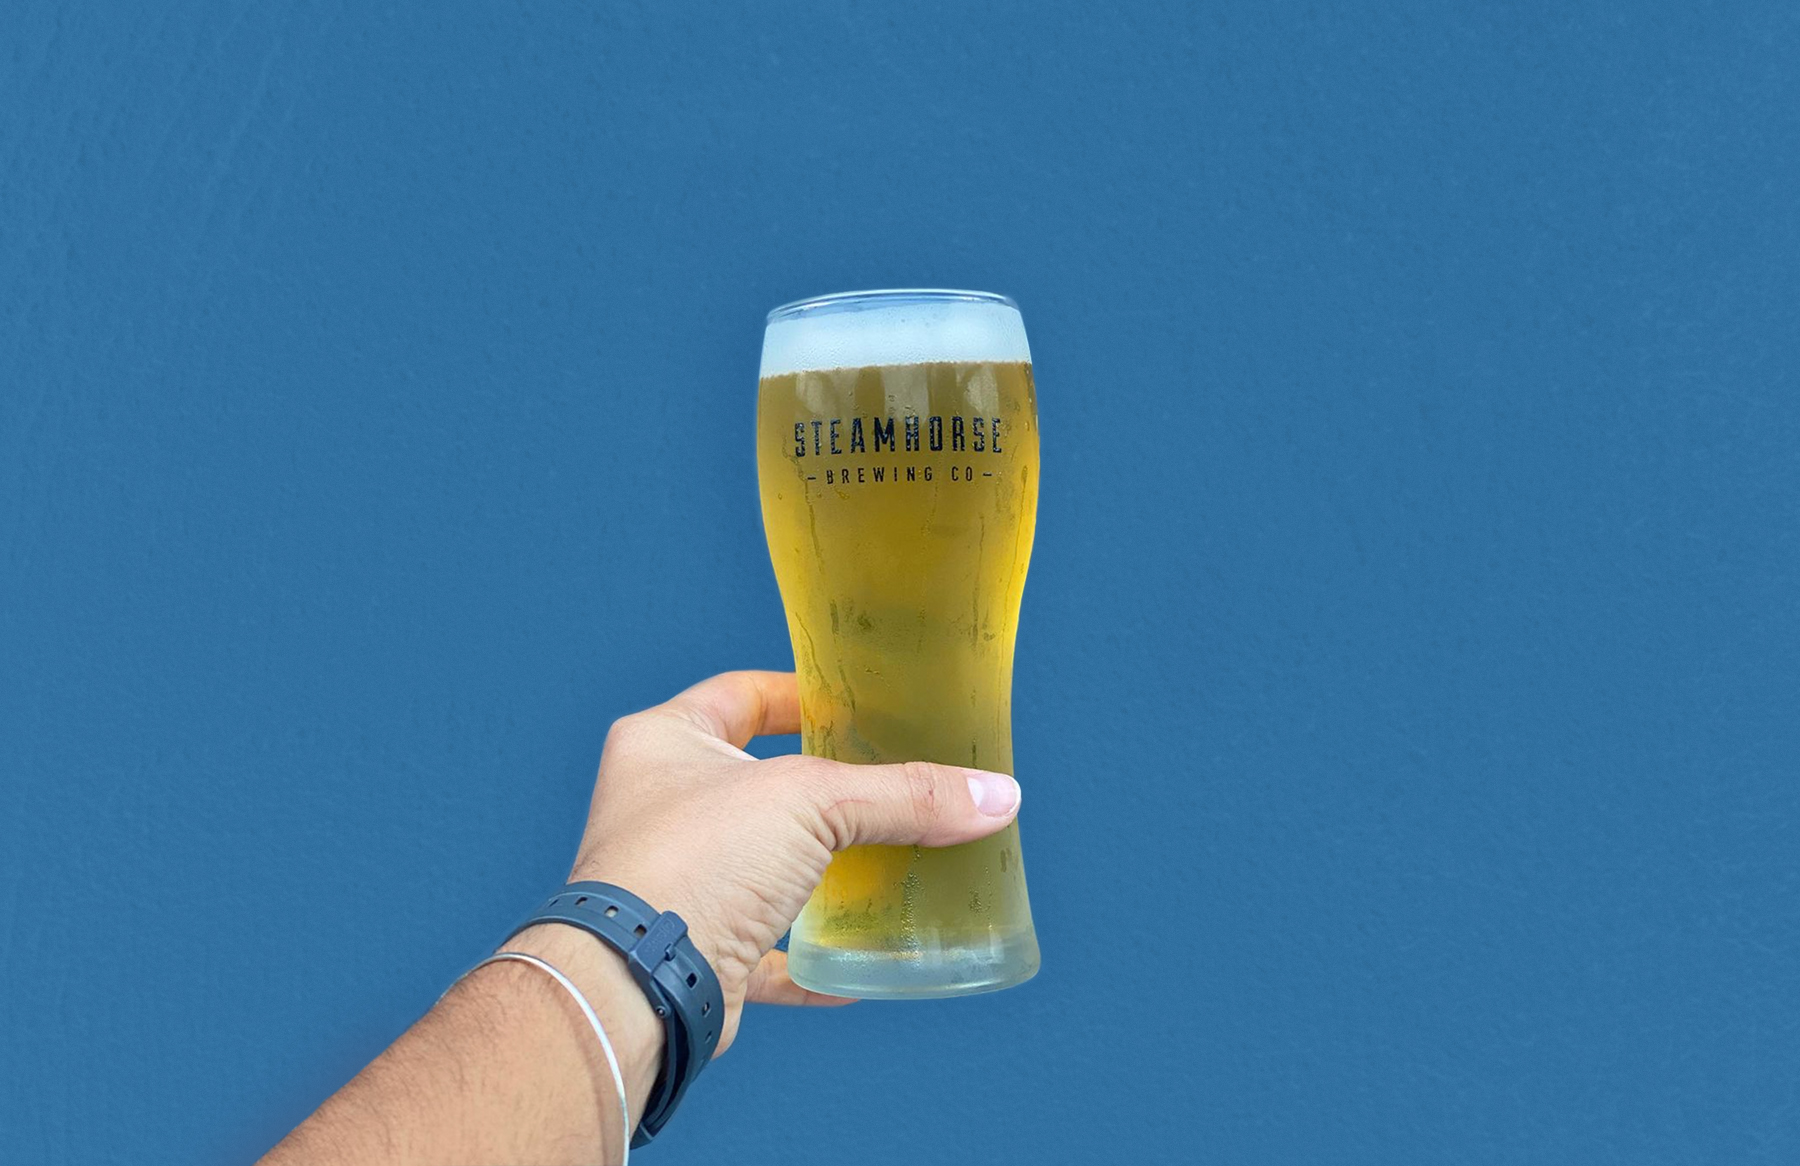 West Palm Beach's local brewery Steam Horse Brewing Co's branding presented on a filled glass of beer held against a blue background.